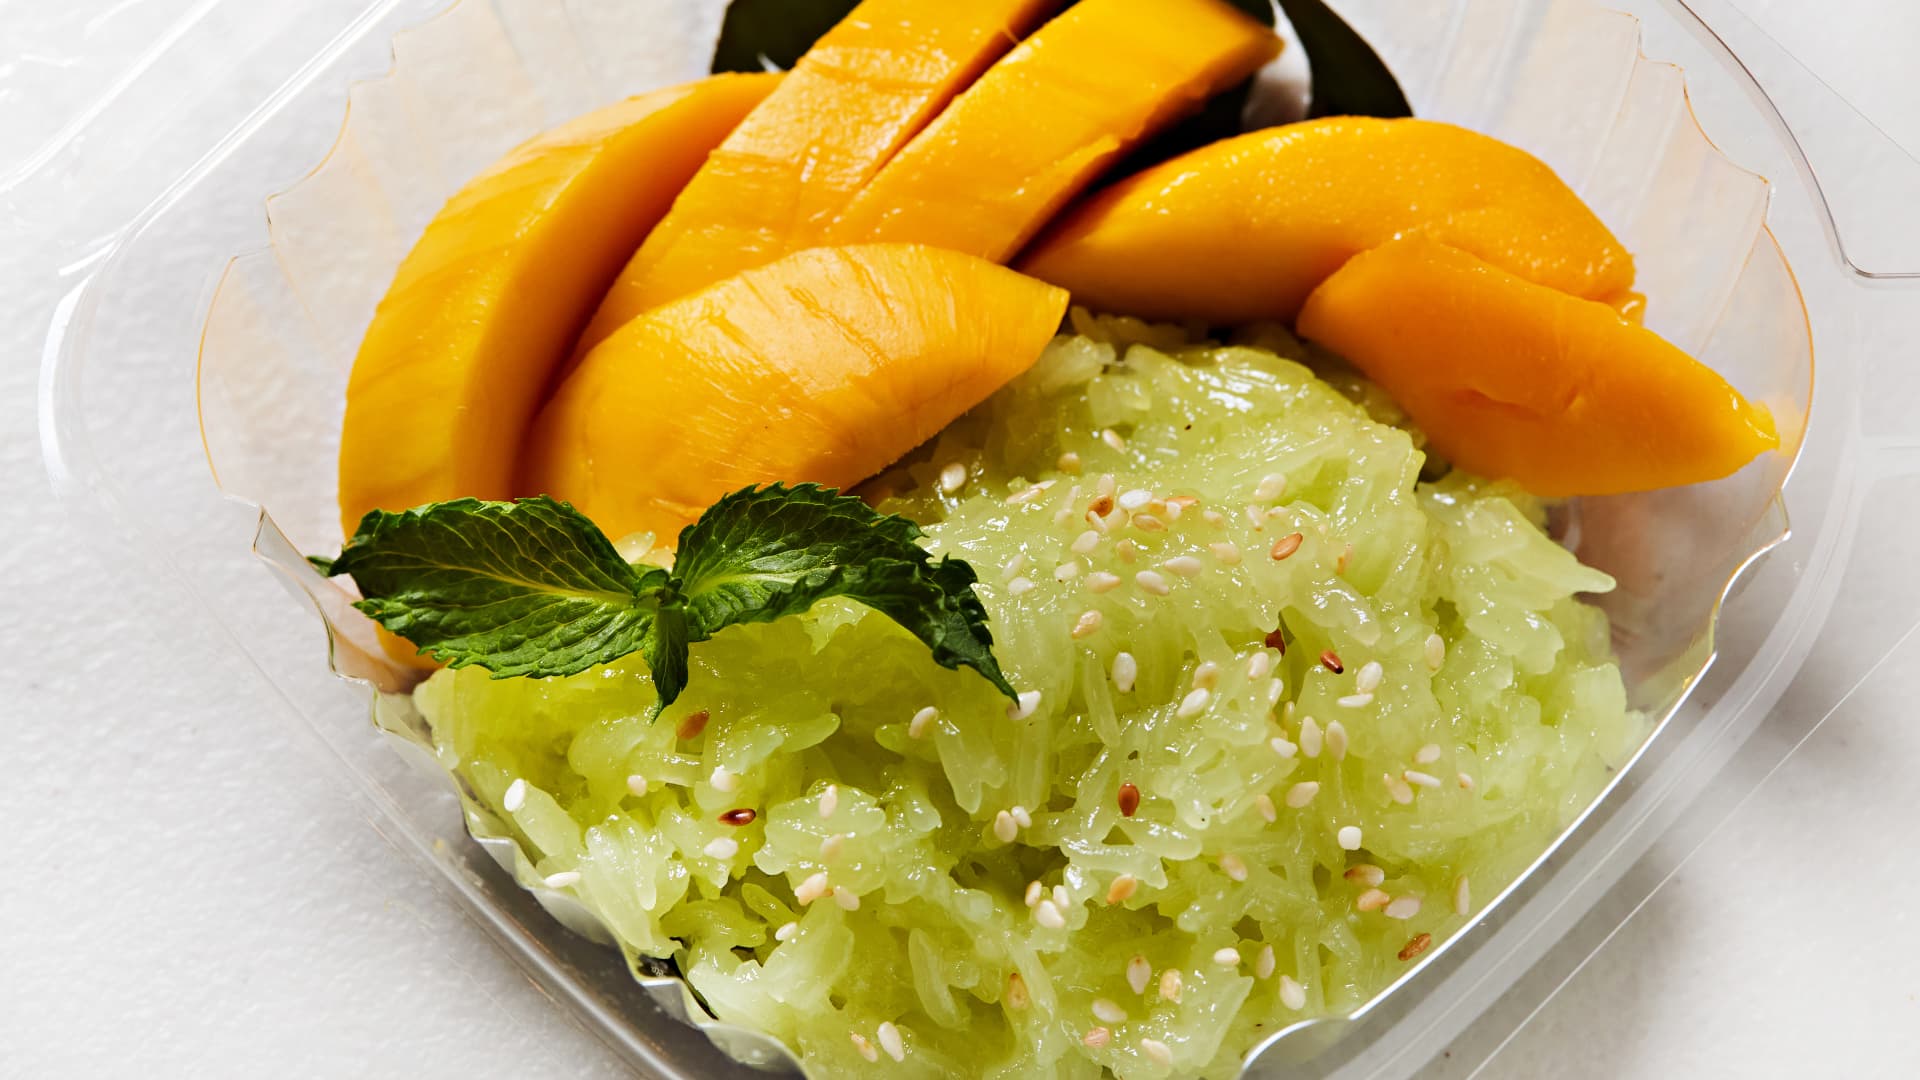 Mango sticky rice is a simple but famous Thai dessert made with glutinous rice, coconut milk, ripe mangos and mung beans.